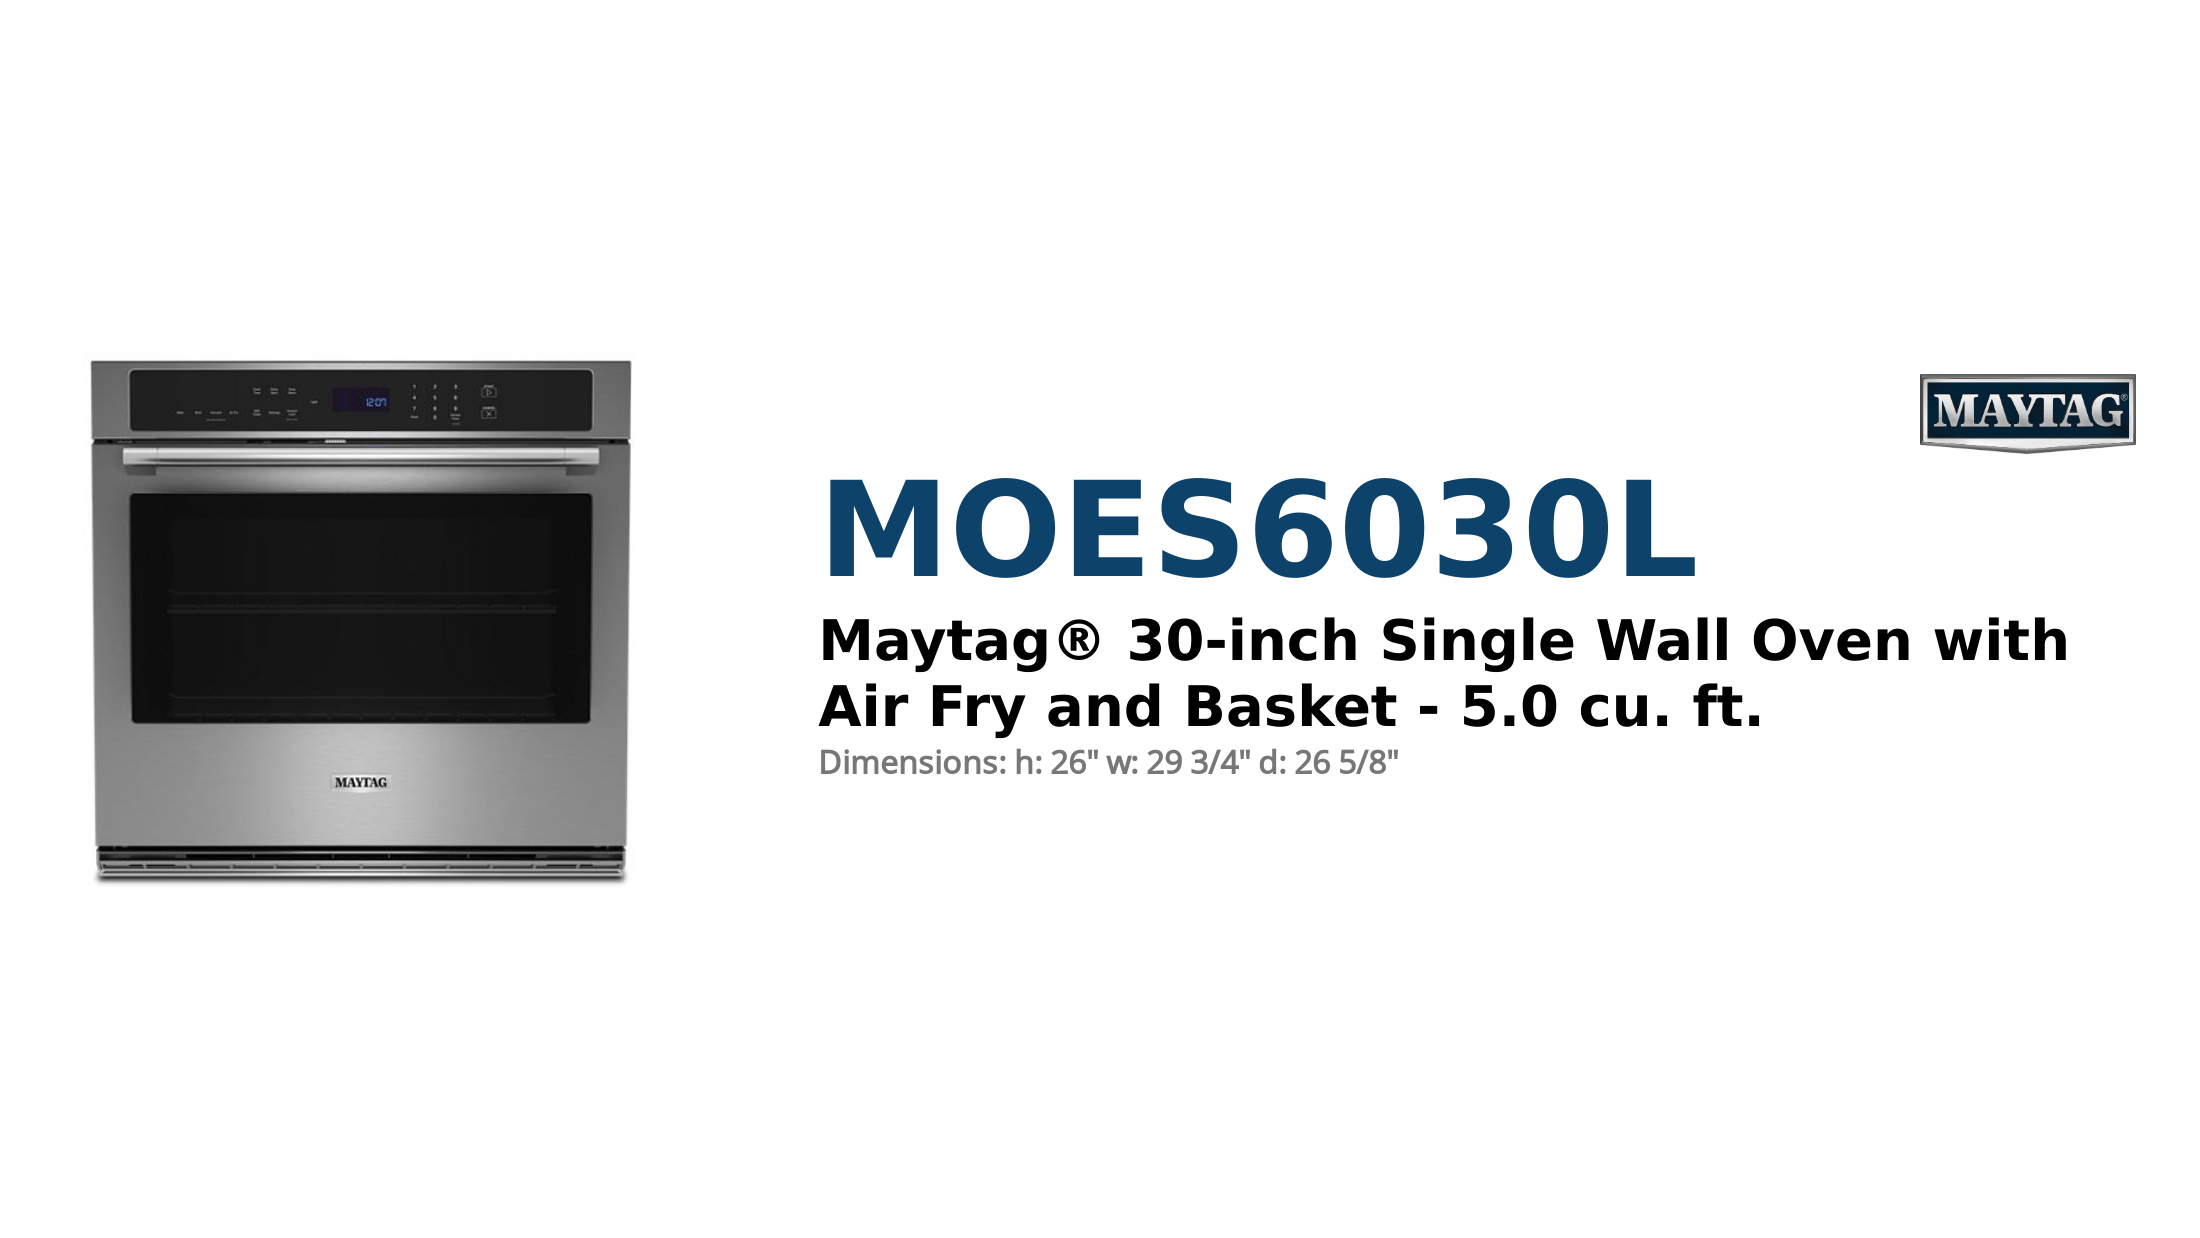 



MAYTAG® 30-INCH SINGLE WALL OVEN WITH AIR FRY AND BASKET - 5.0 CU. FT.



